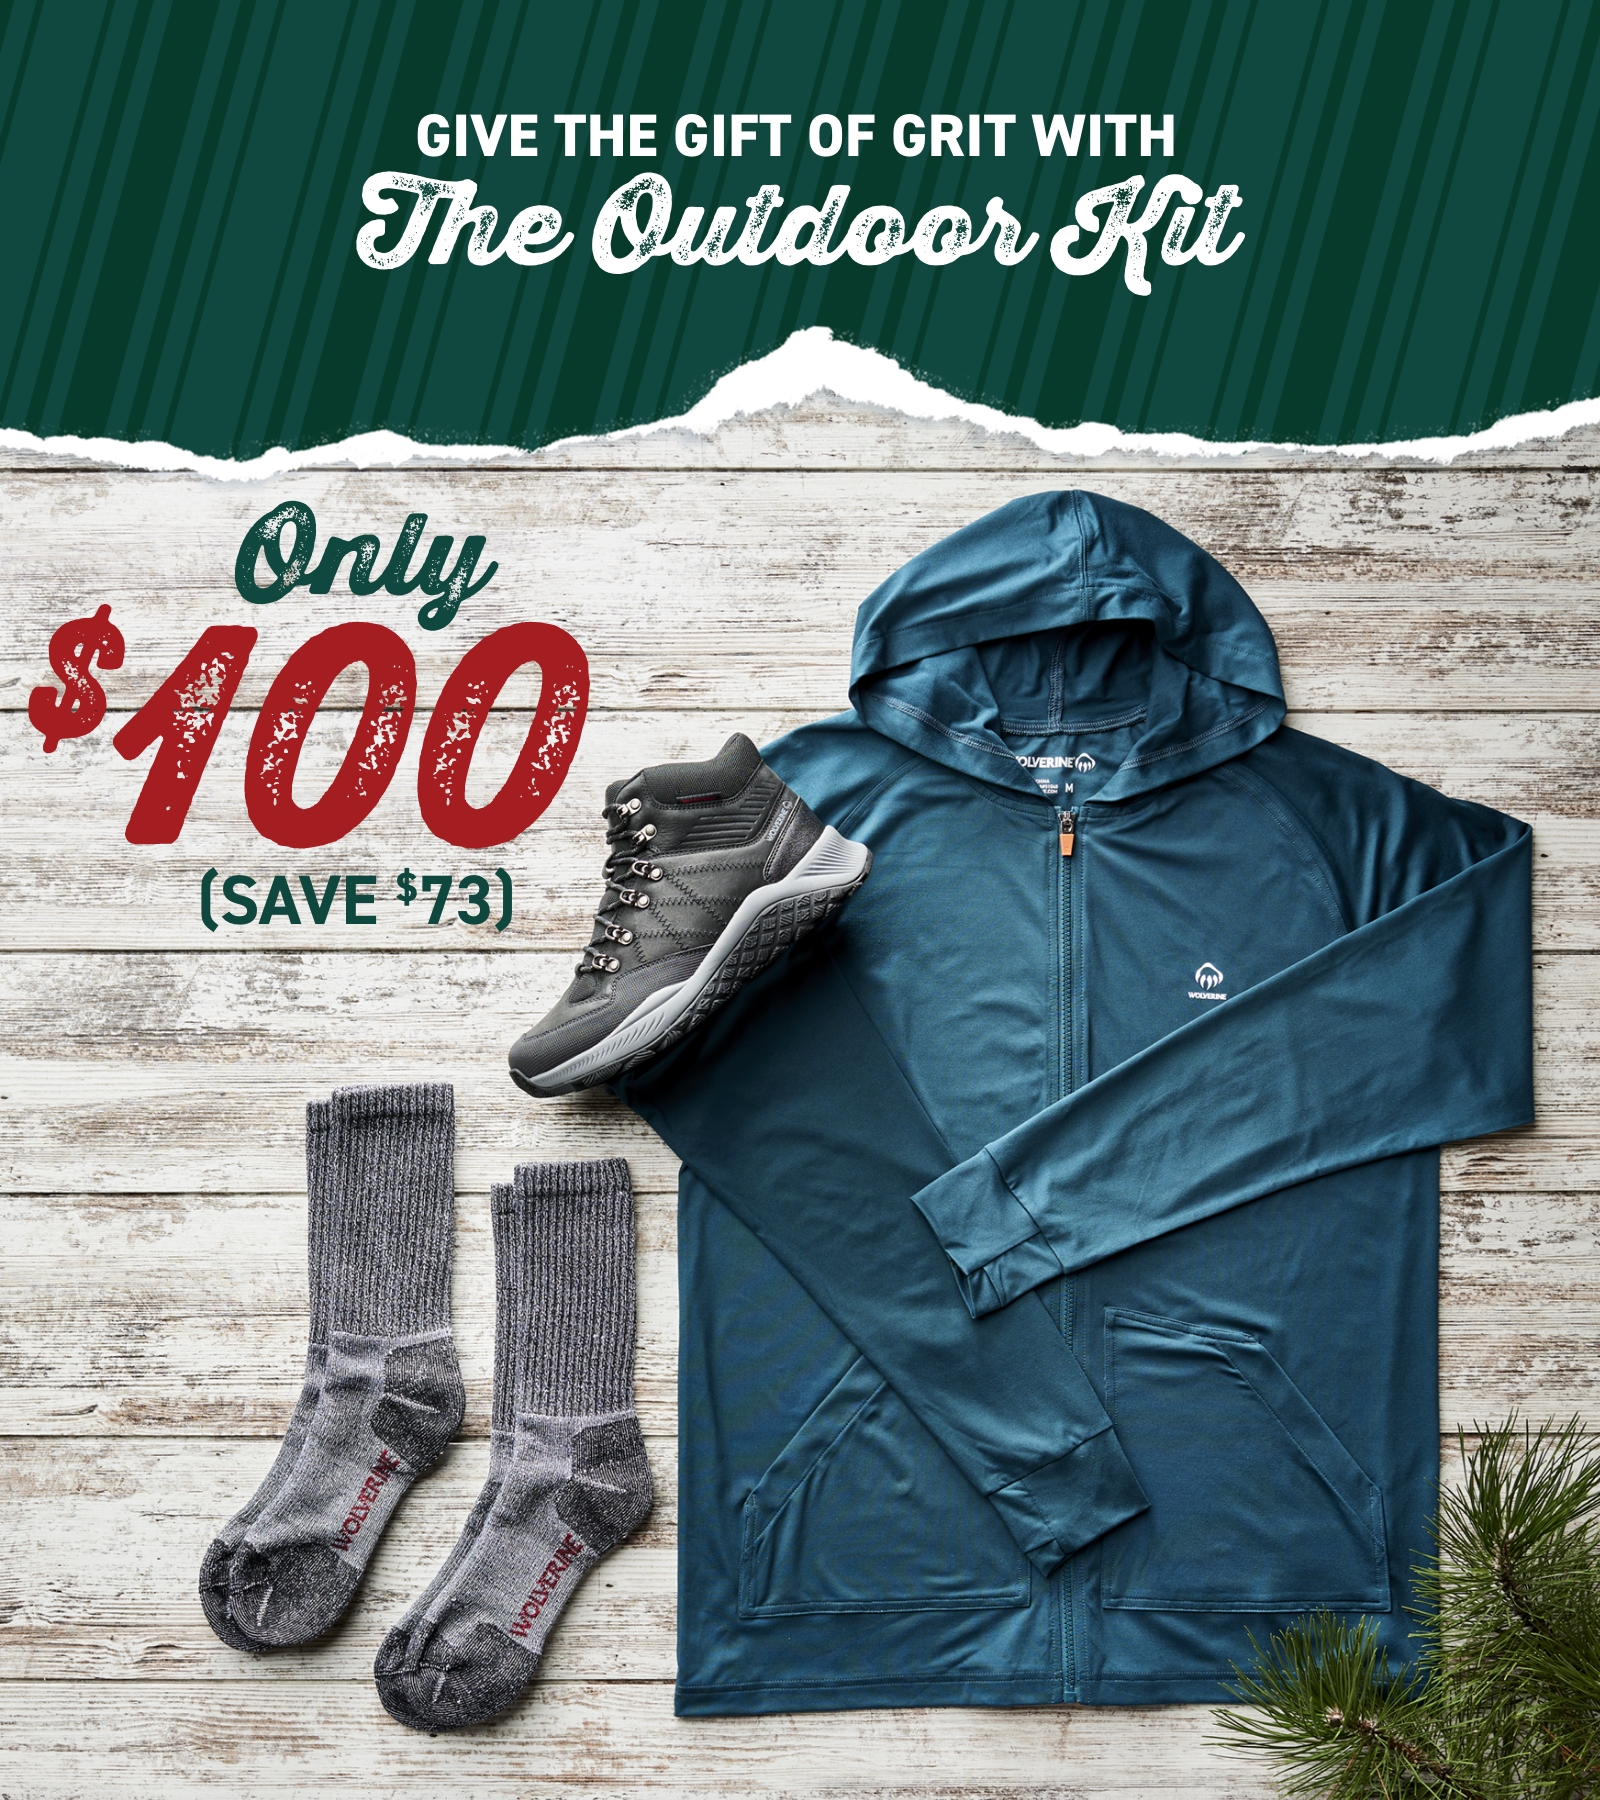 The Outdoor Kit